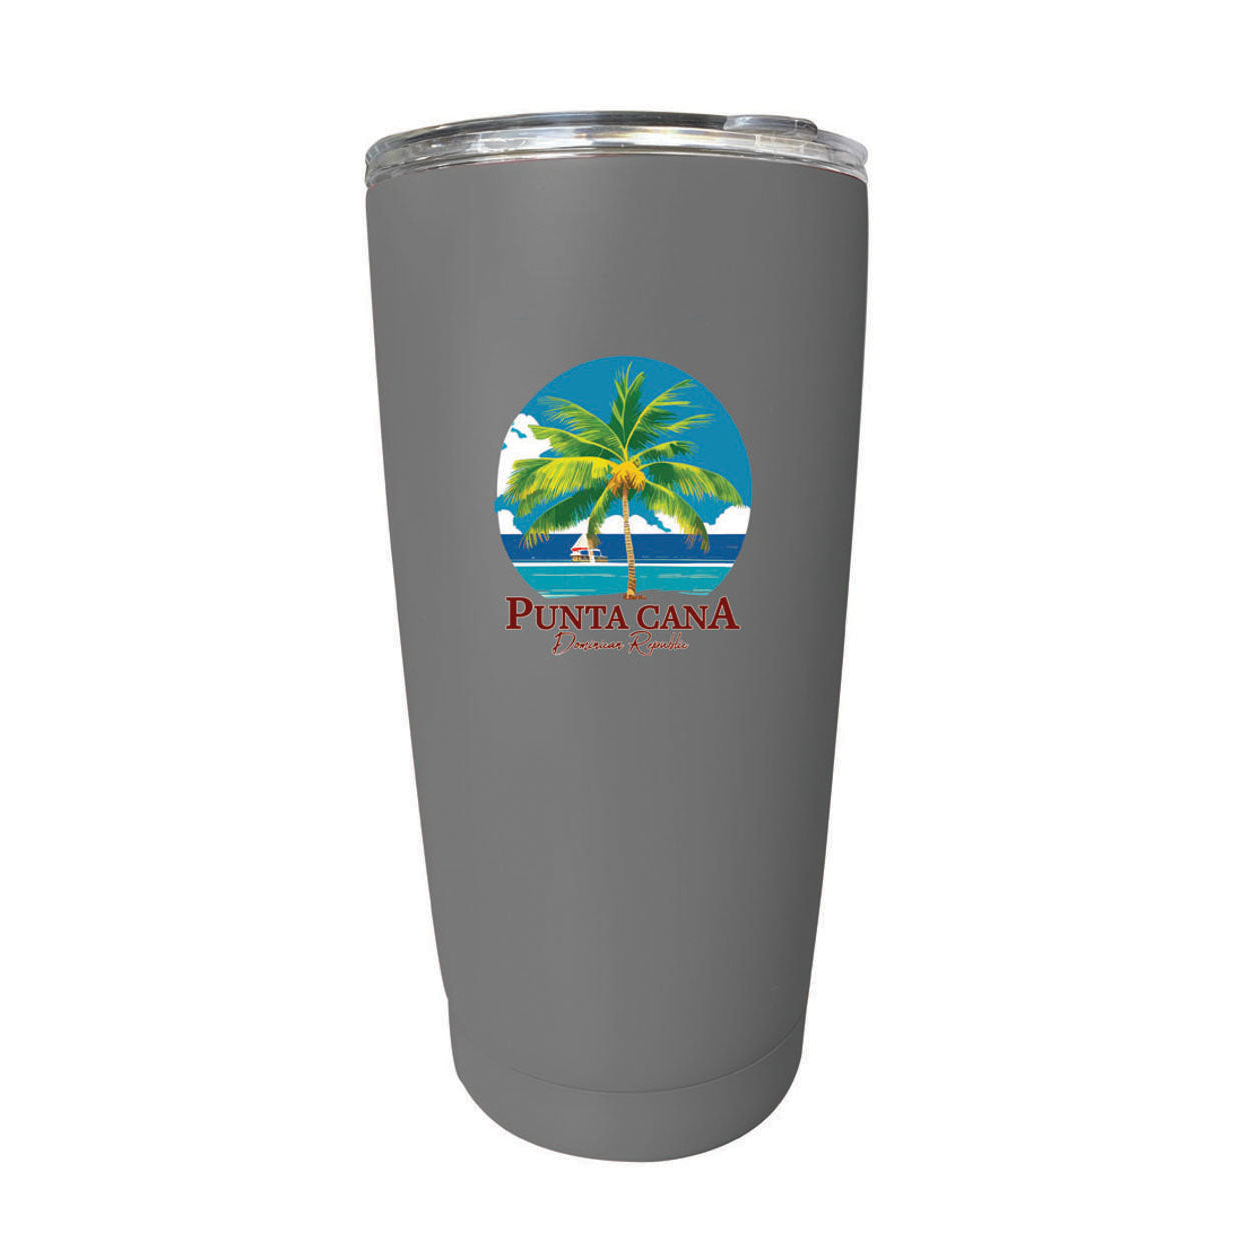 Punta Cana Dominican Republic Souvenir 16 Oz Stainless Steel Insulated Tumbler - Purple, PARROT B